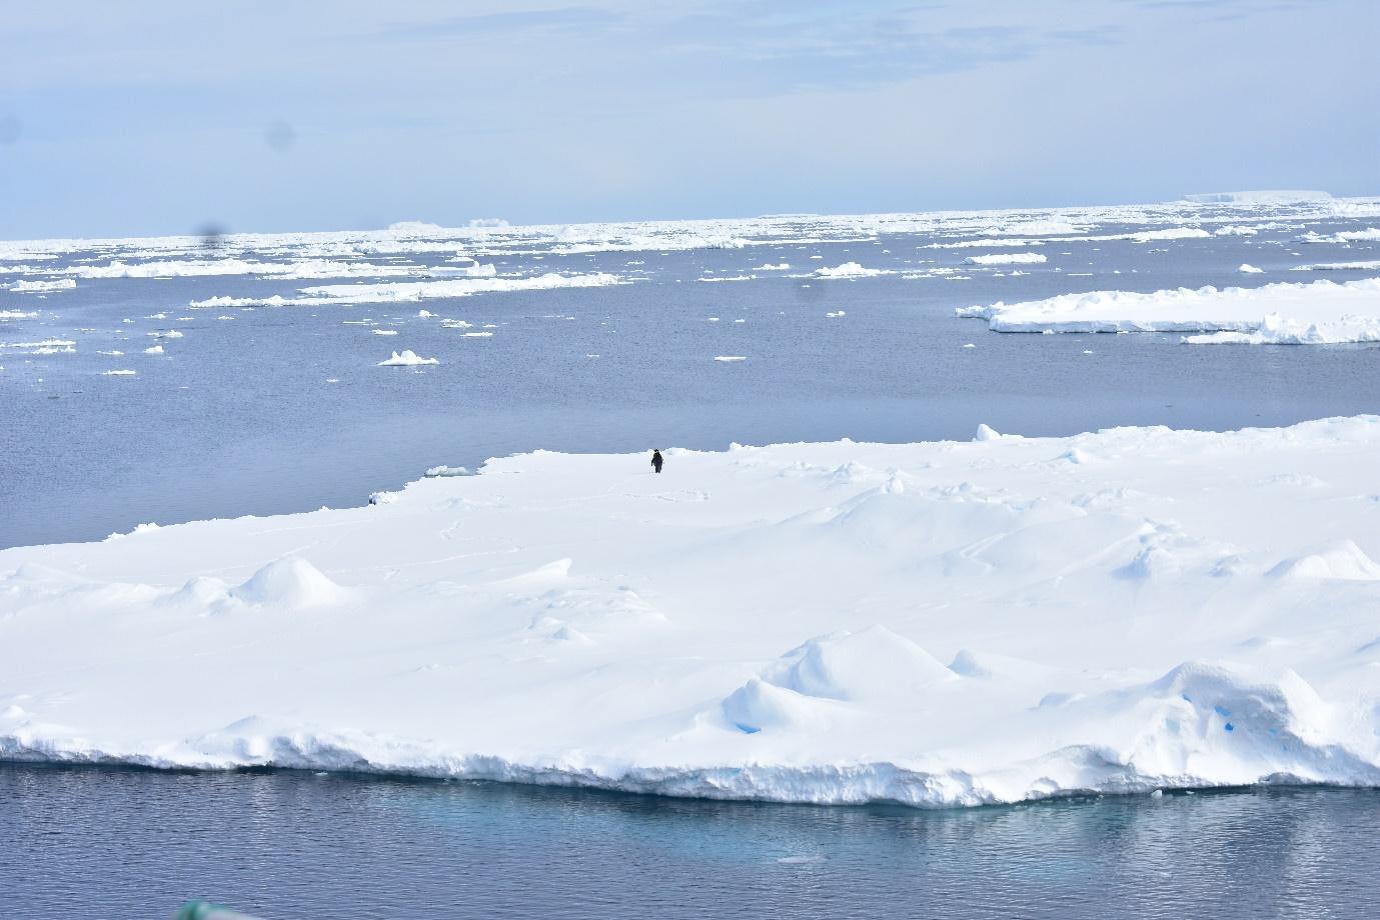 A new NCPOR study attempts to resolve the Mystery of extremely low sea ice cover in the Antarctic.